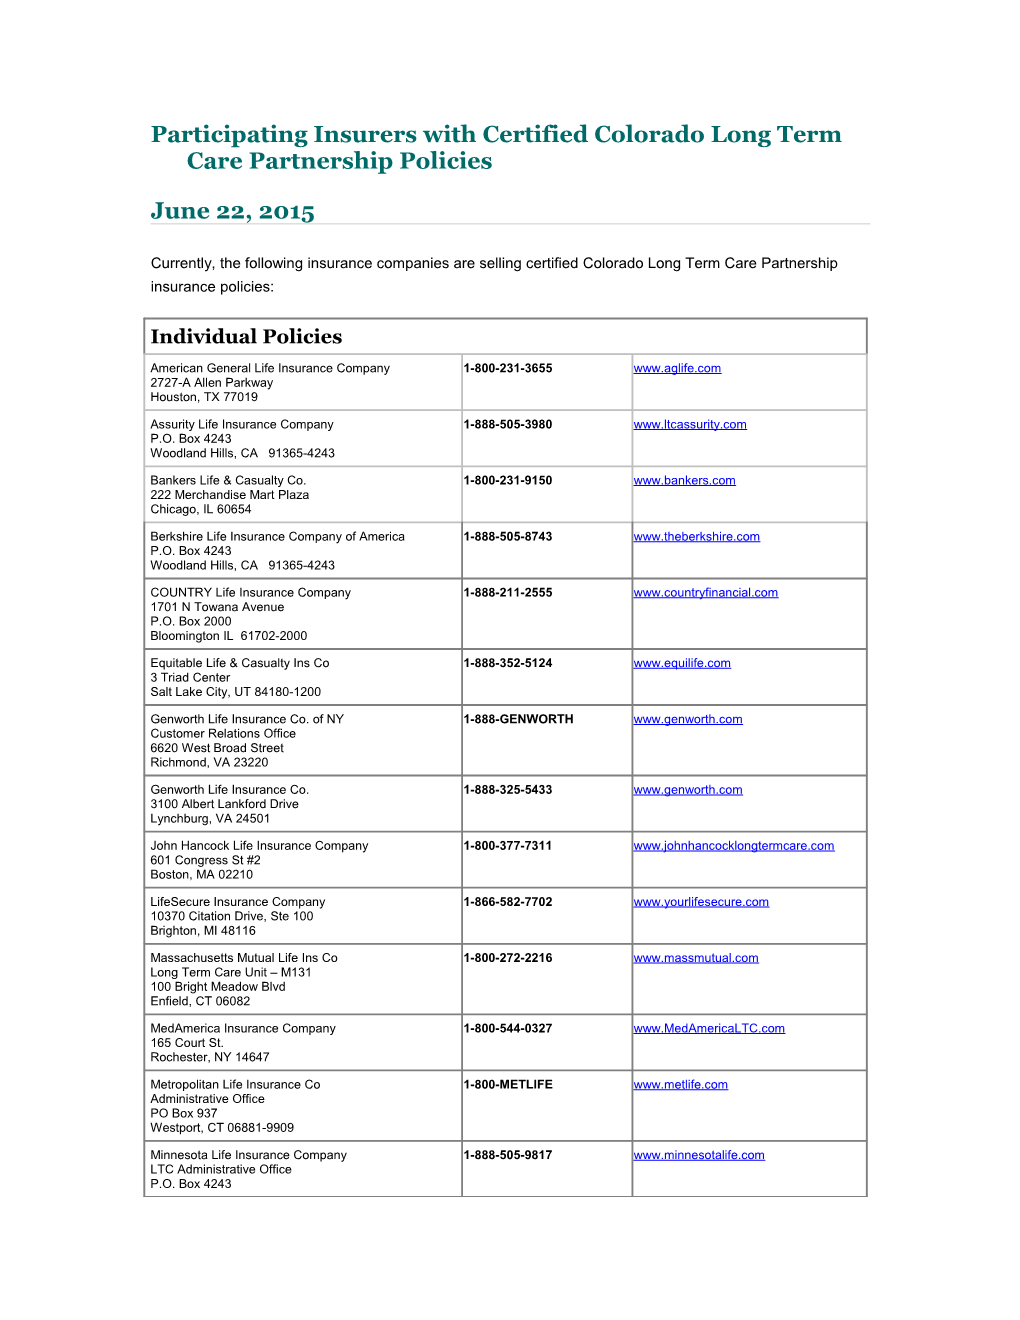 Participating Insurers with Certified Colorado Long Term Care Partnership Policies